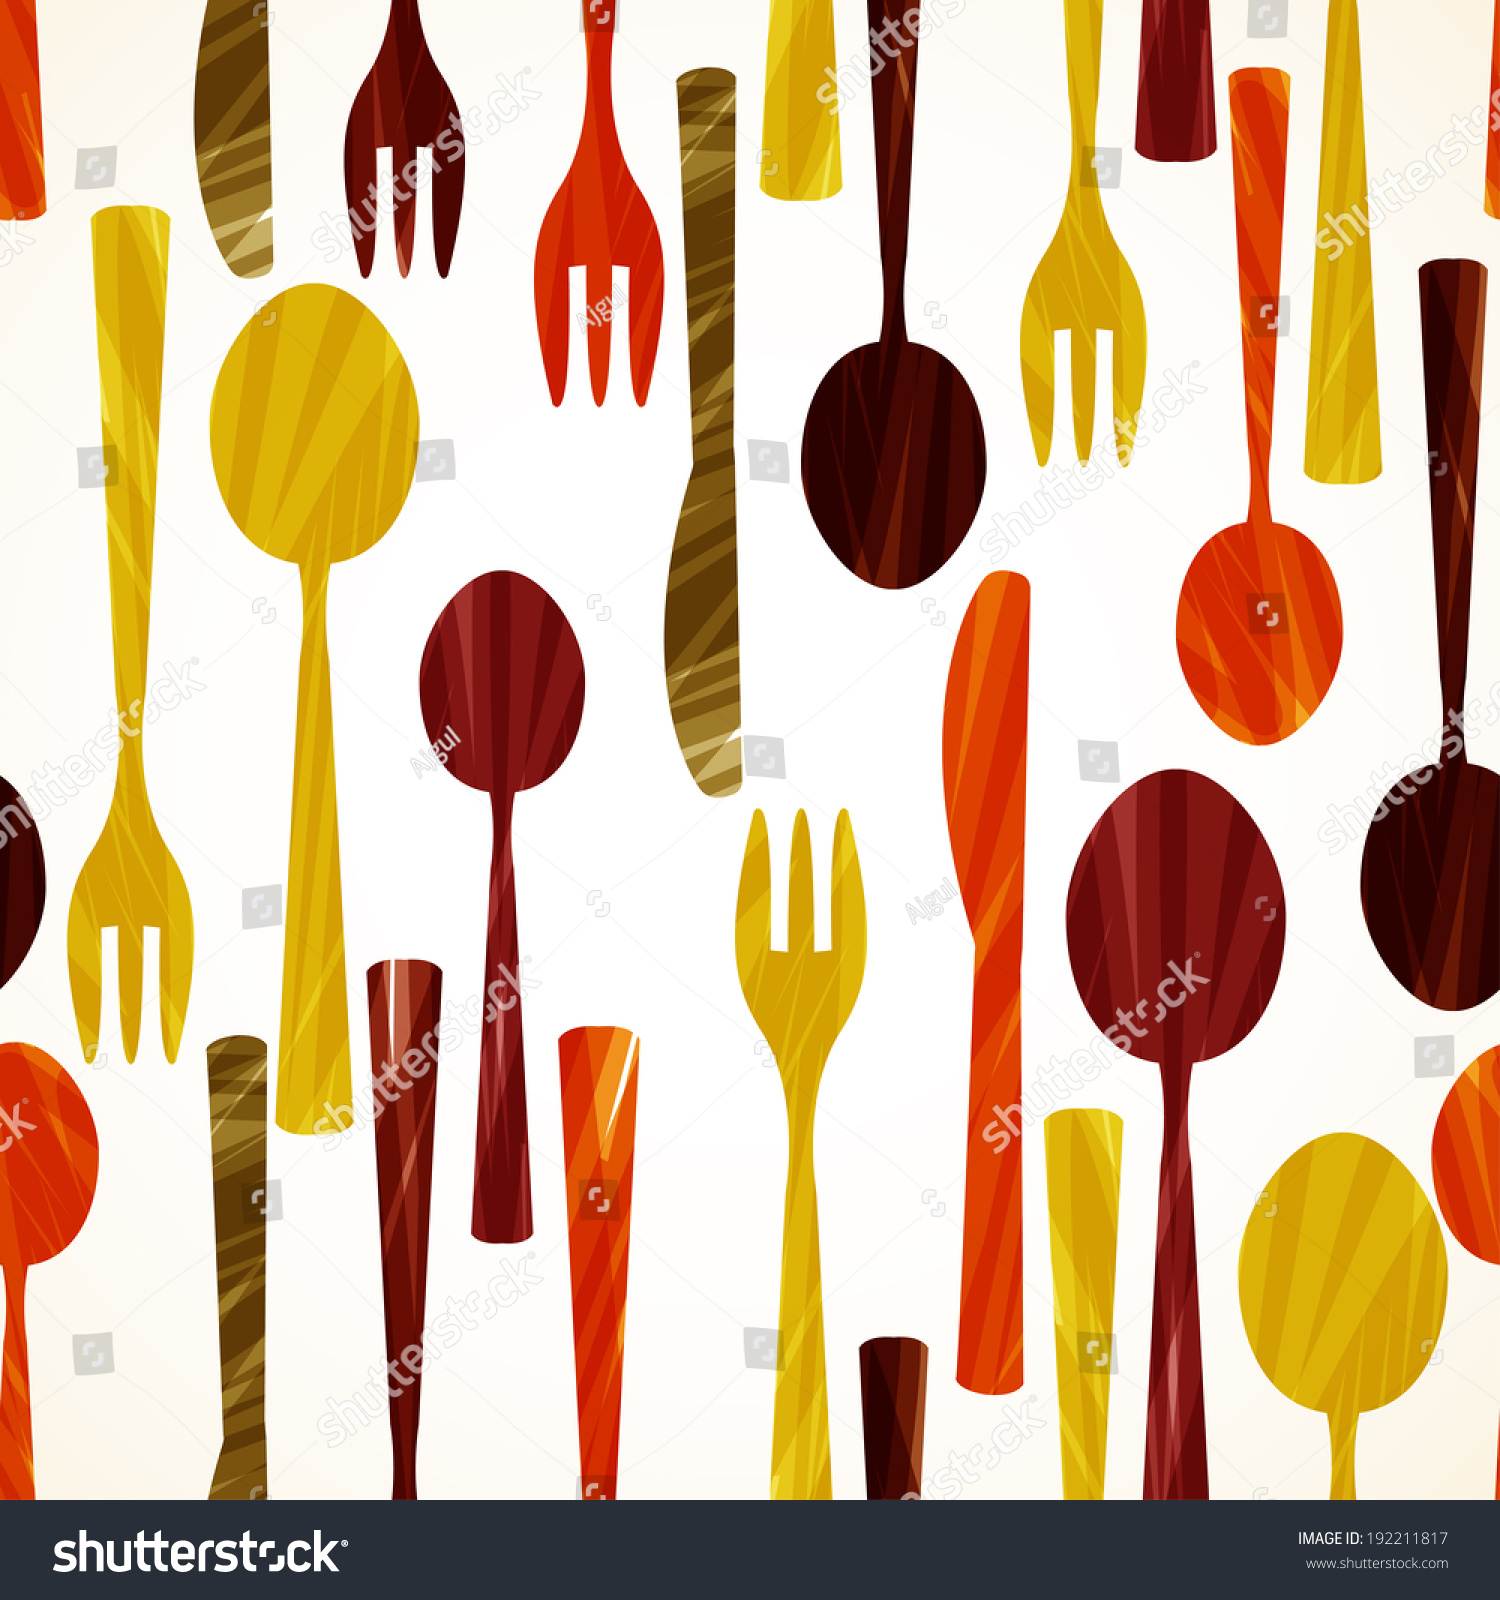 Seamless pattern with flatware. Vector Illustration.  #192211817